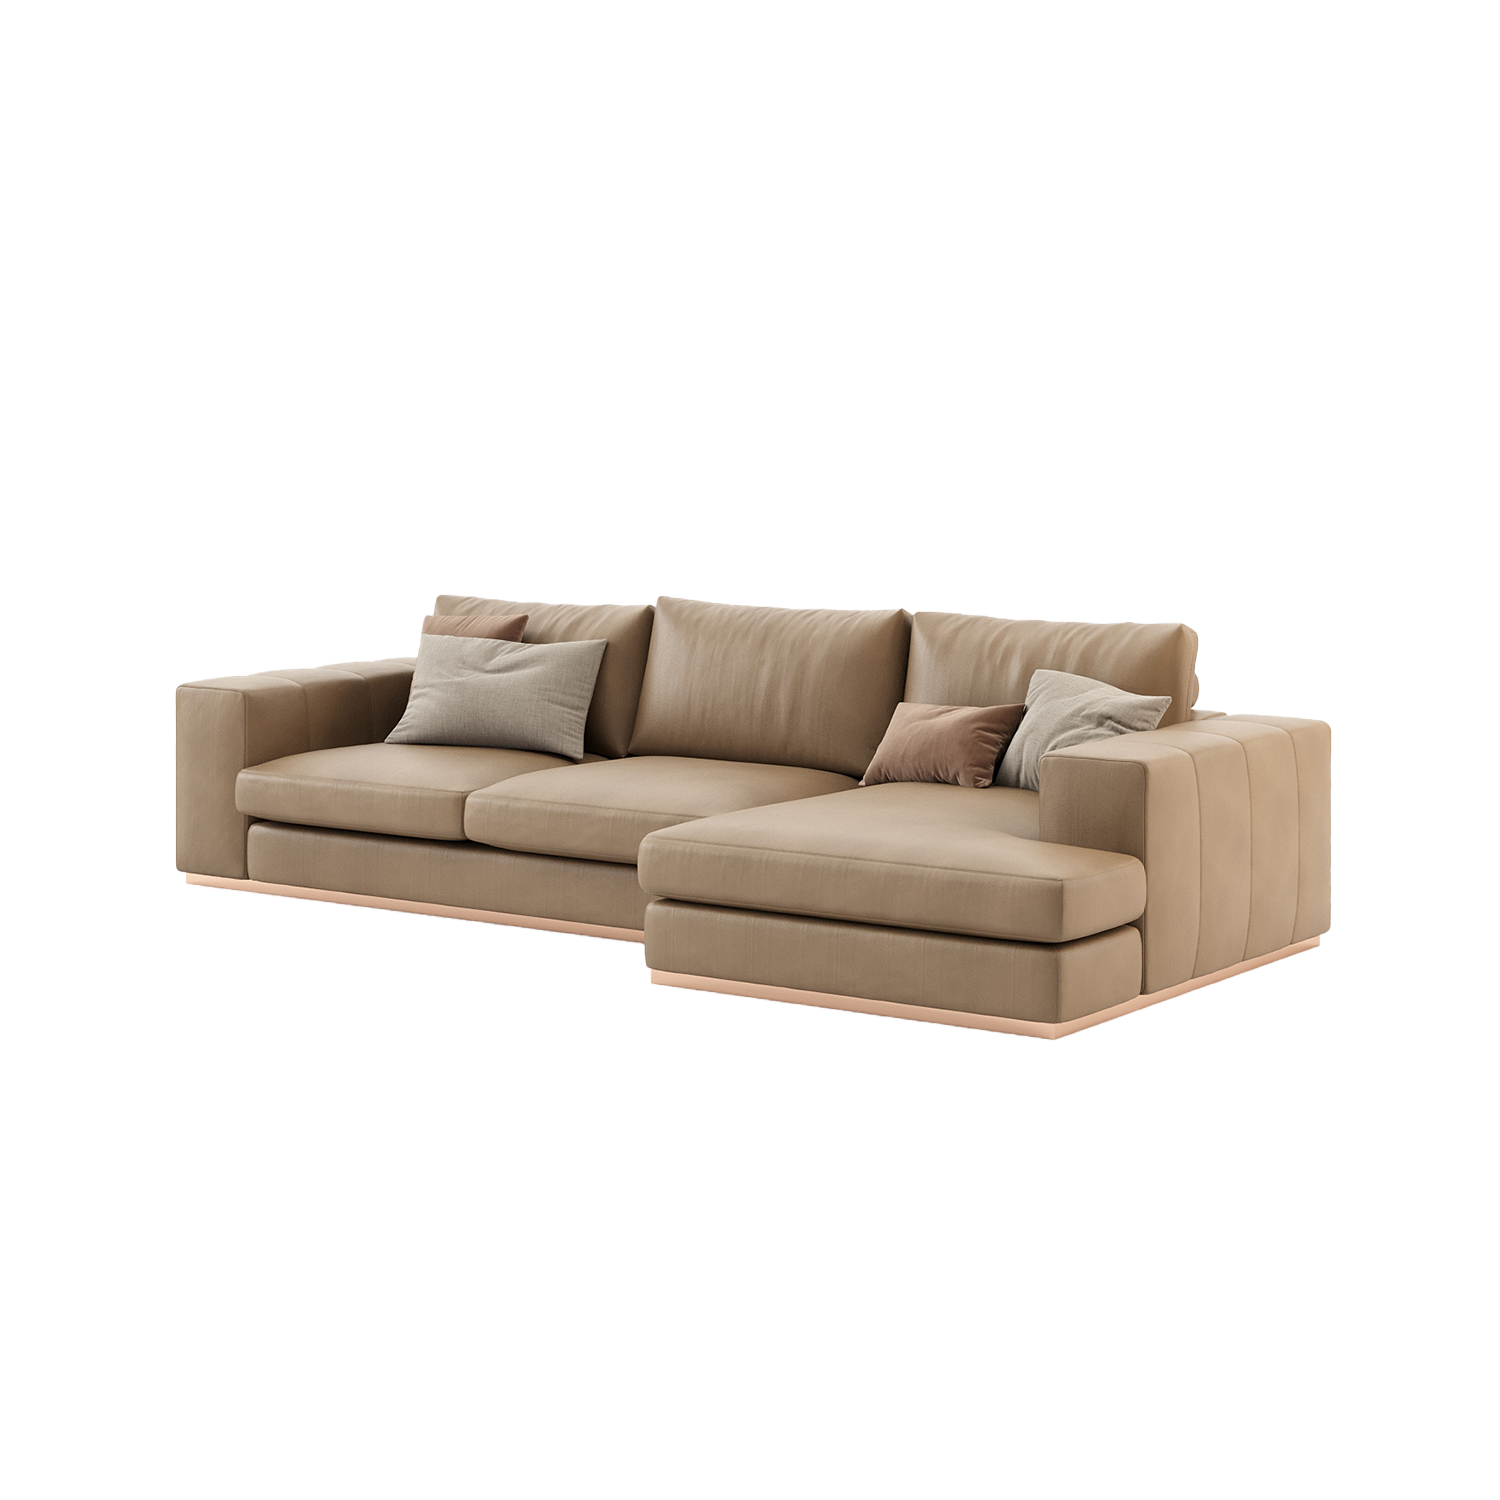 Charlie Sofa with Chaise Lounge